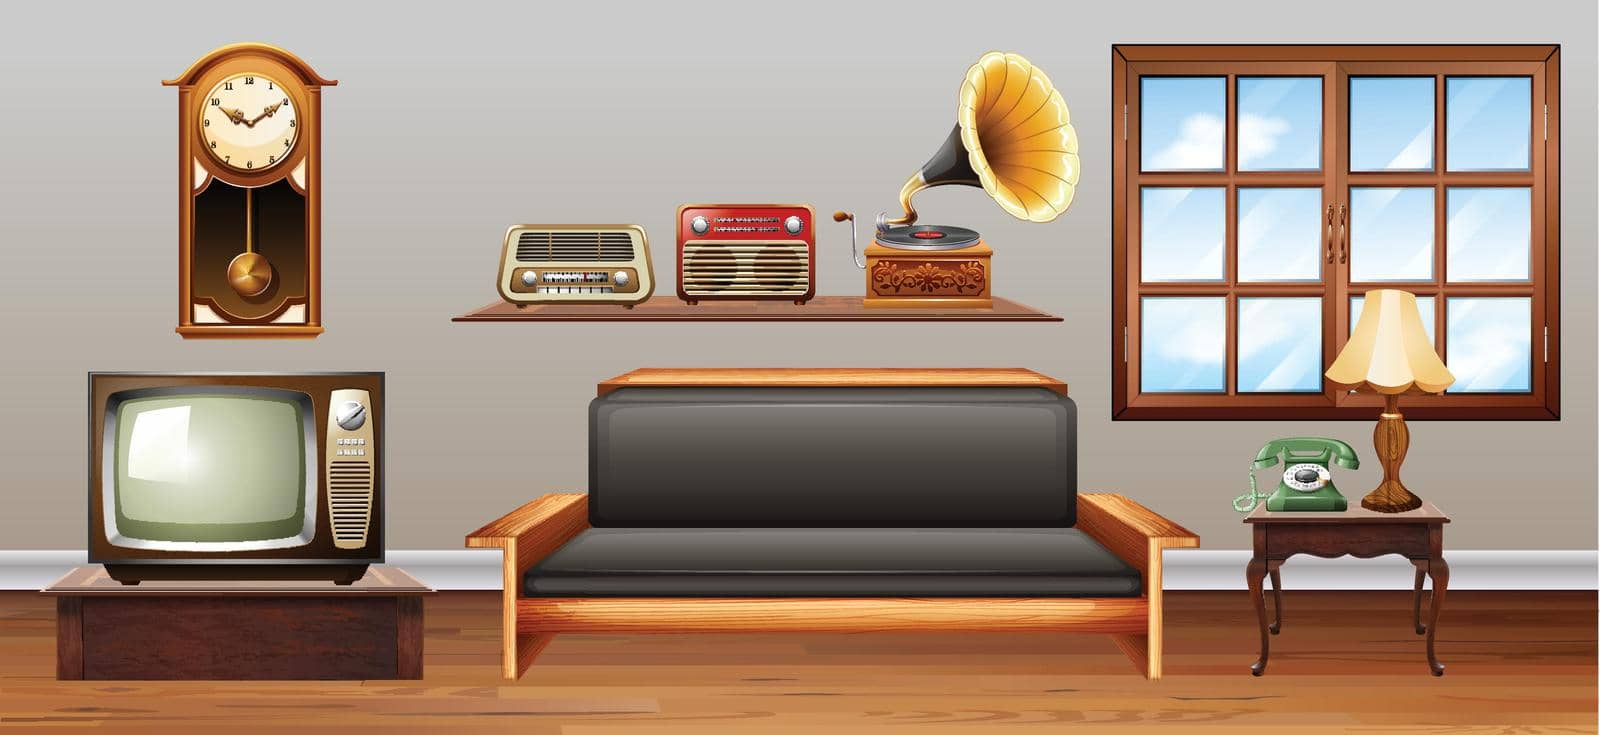 Vintage objects in the living room by iimages